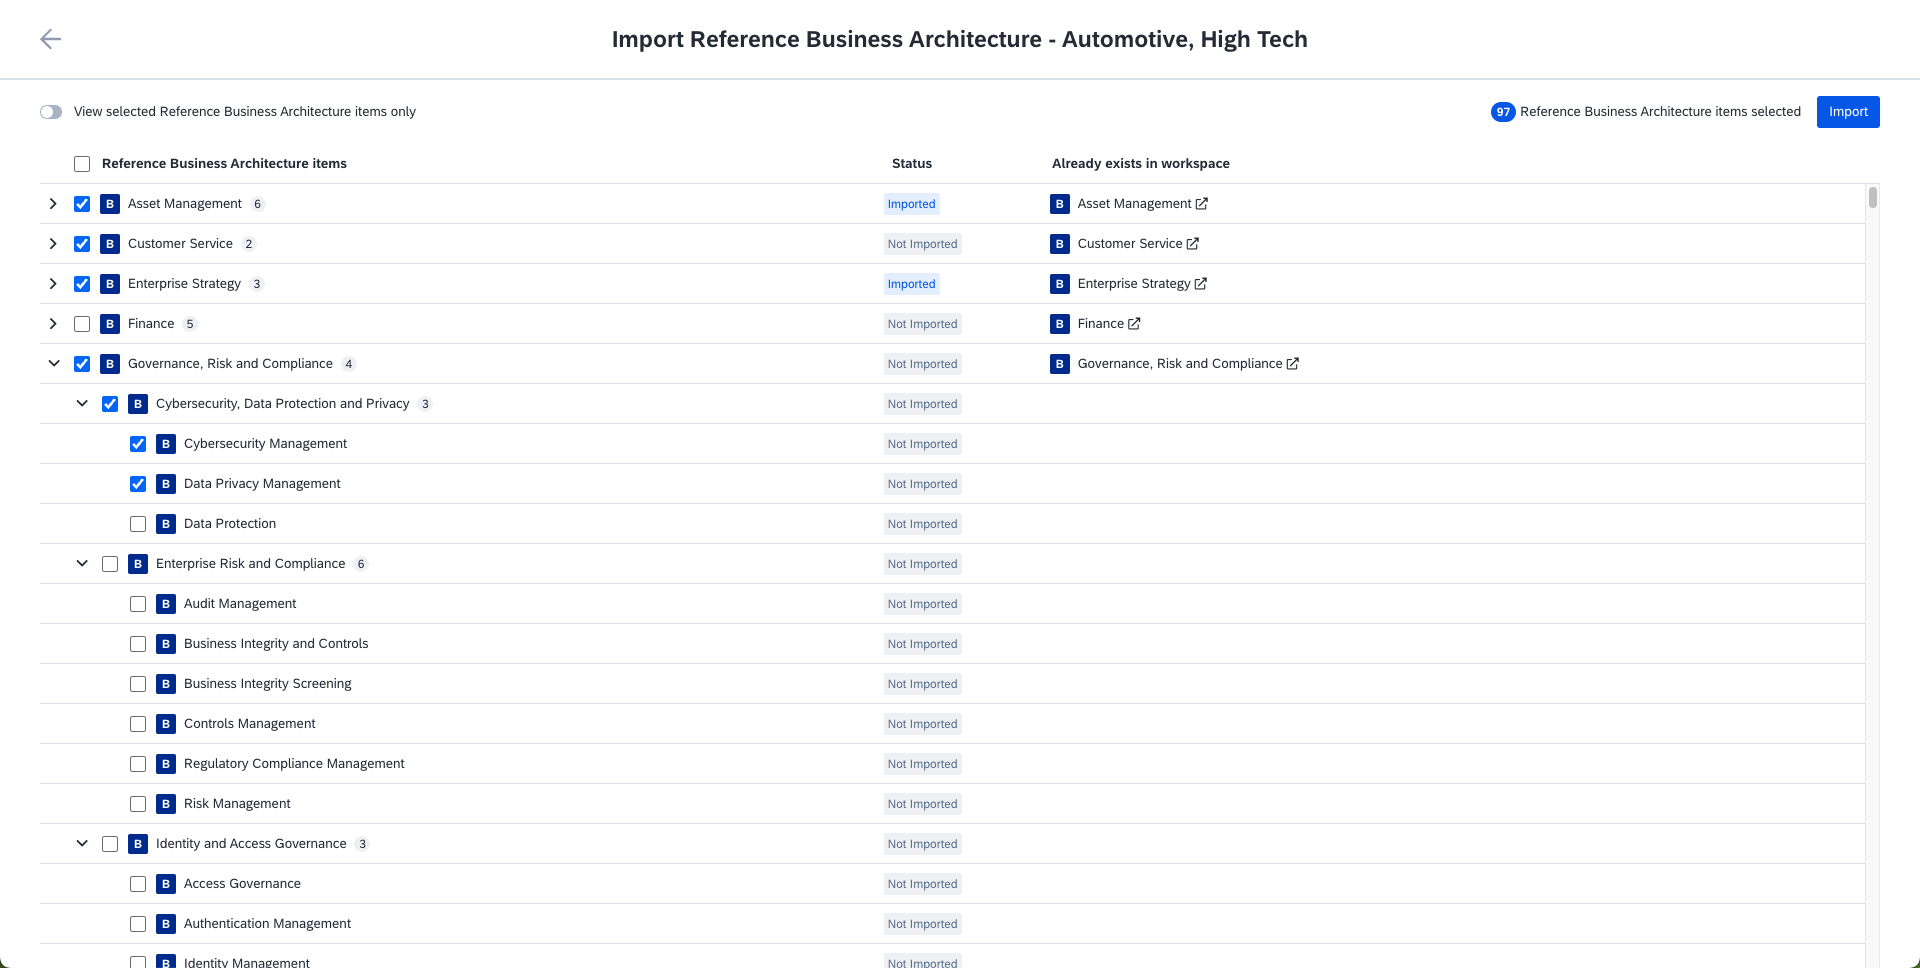 Importing Business Capability Hierarchies from the Reference Business Architecture